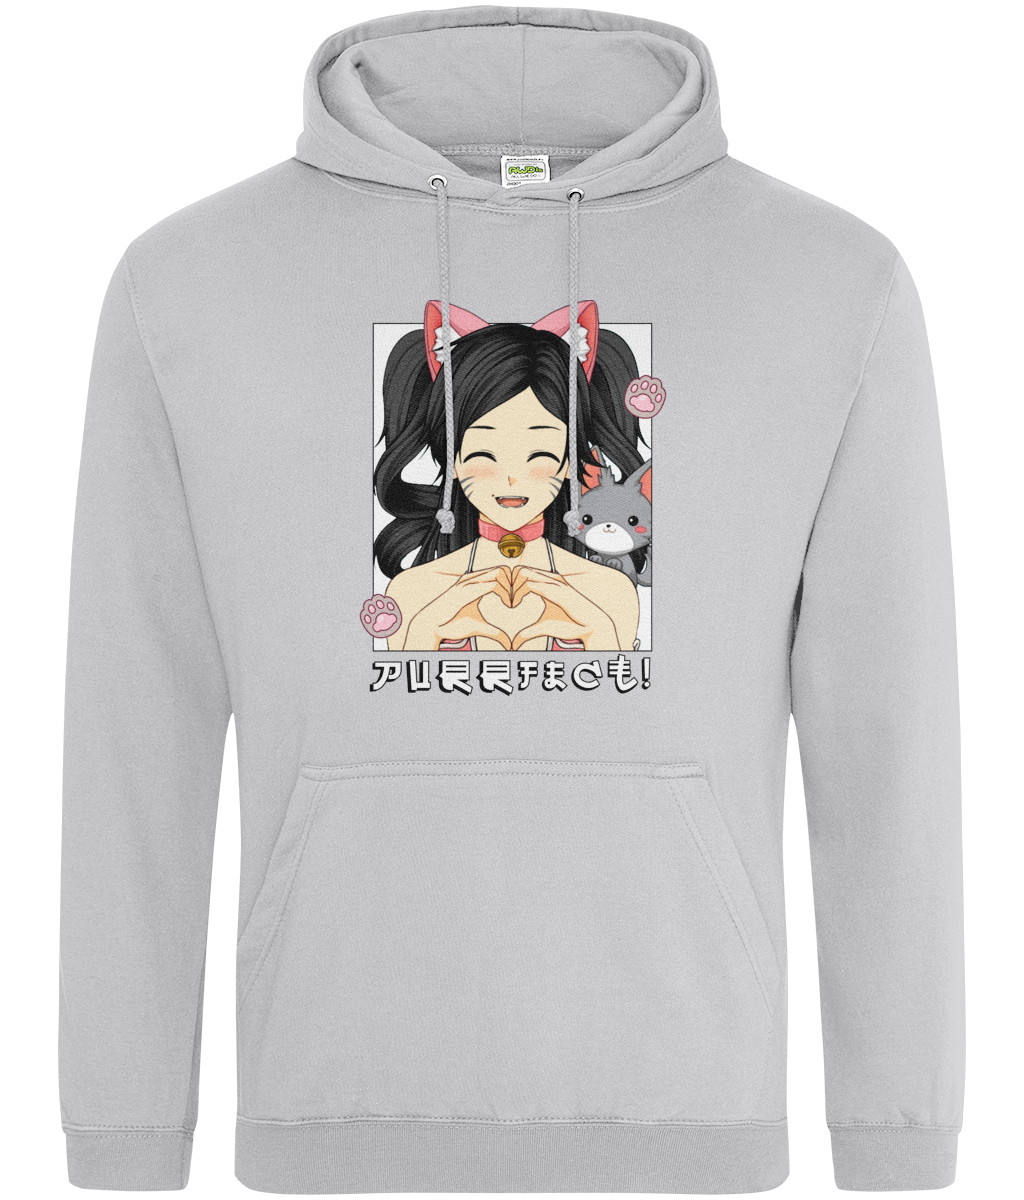 Purrfect Anime Girl College Hoodie